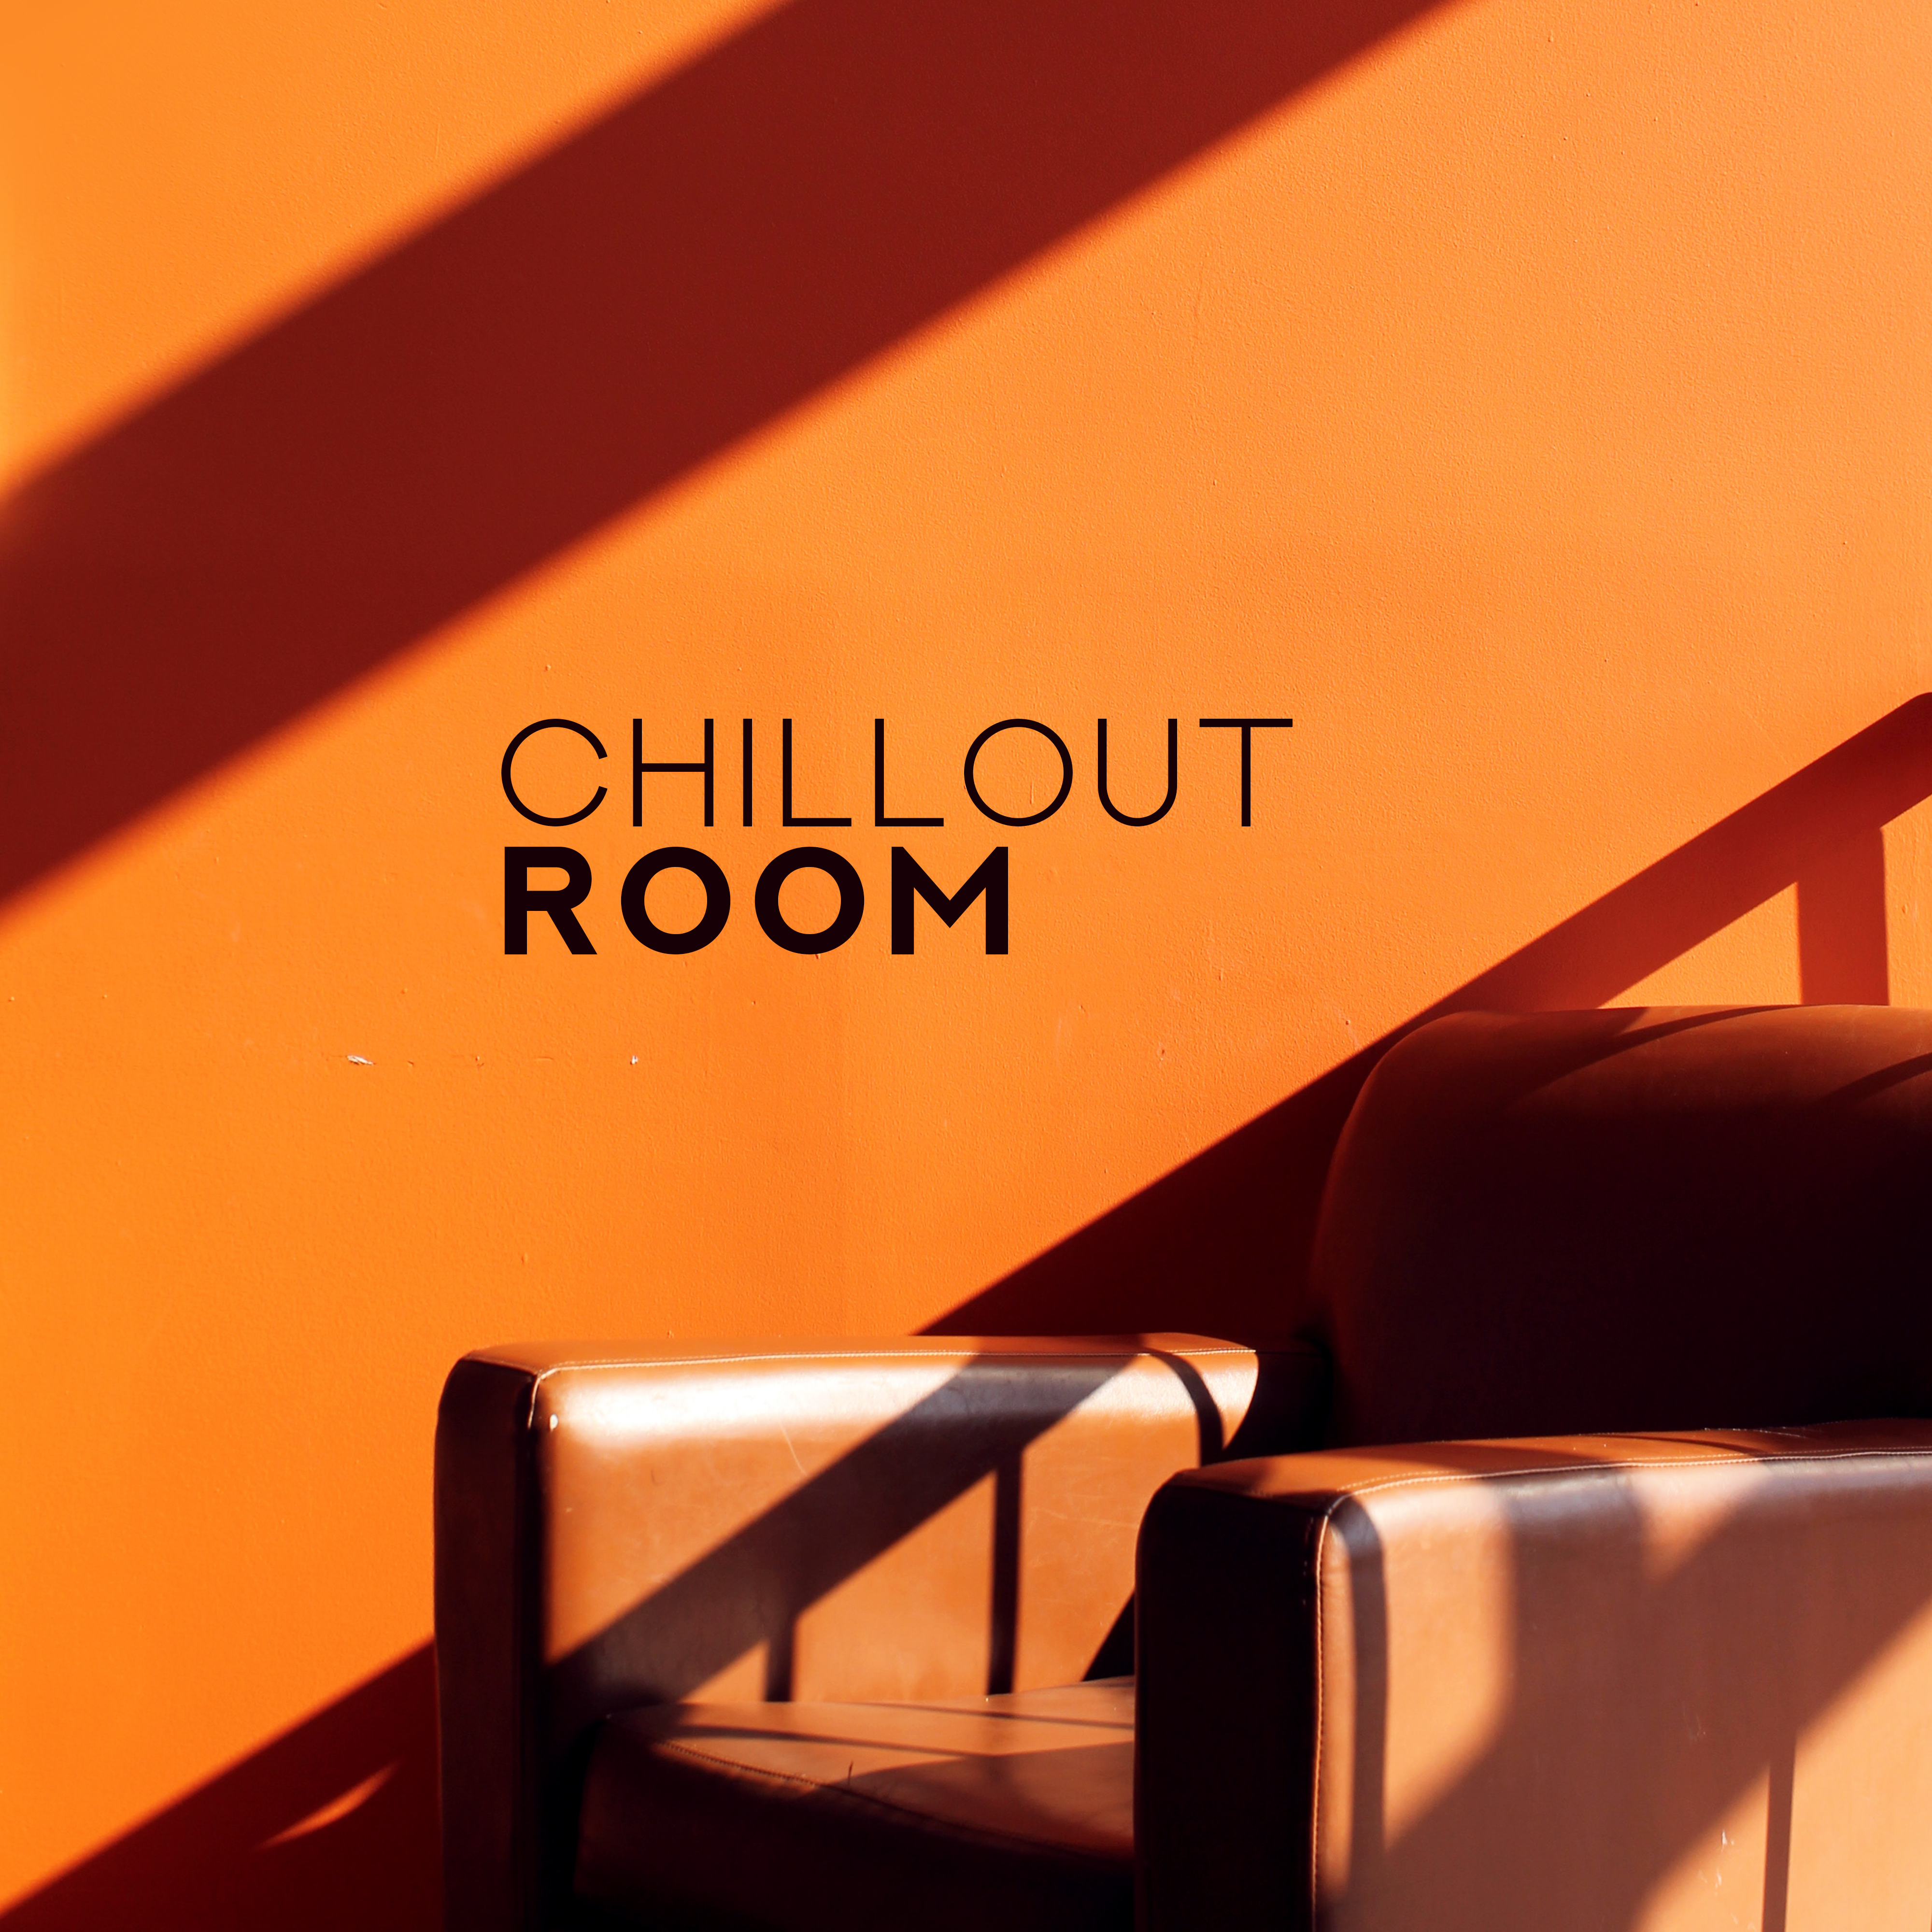 Chillout Room: Ambient Music for Breaks in Everyday Work, Rest, Moments of Relaxation and Stress Relief